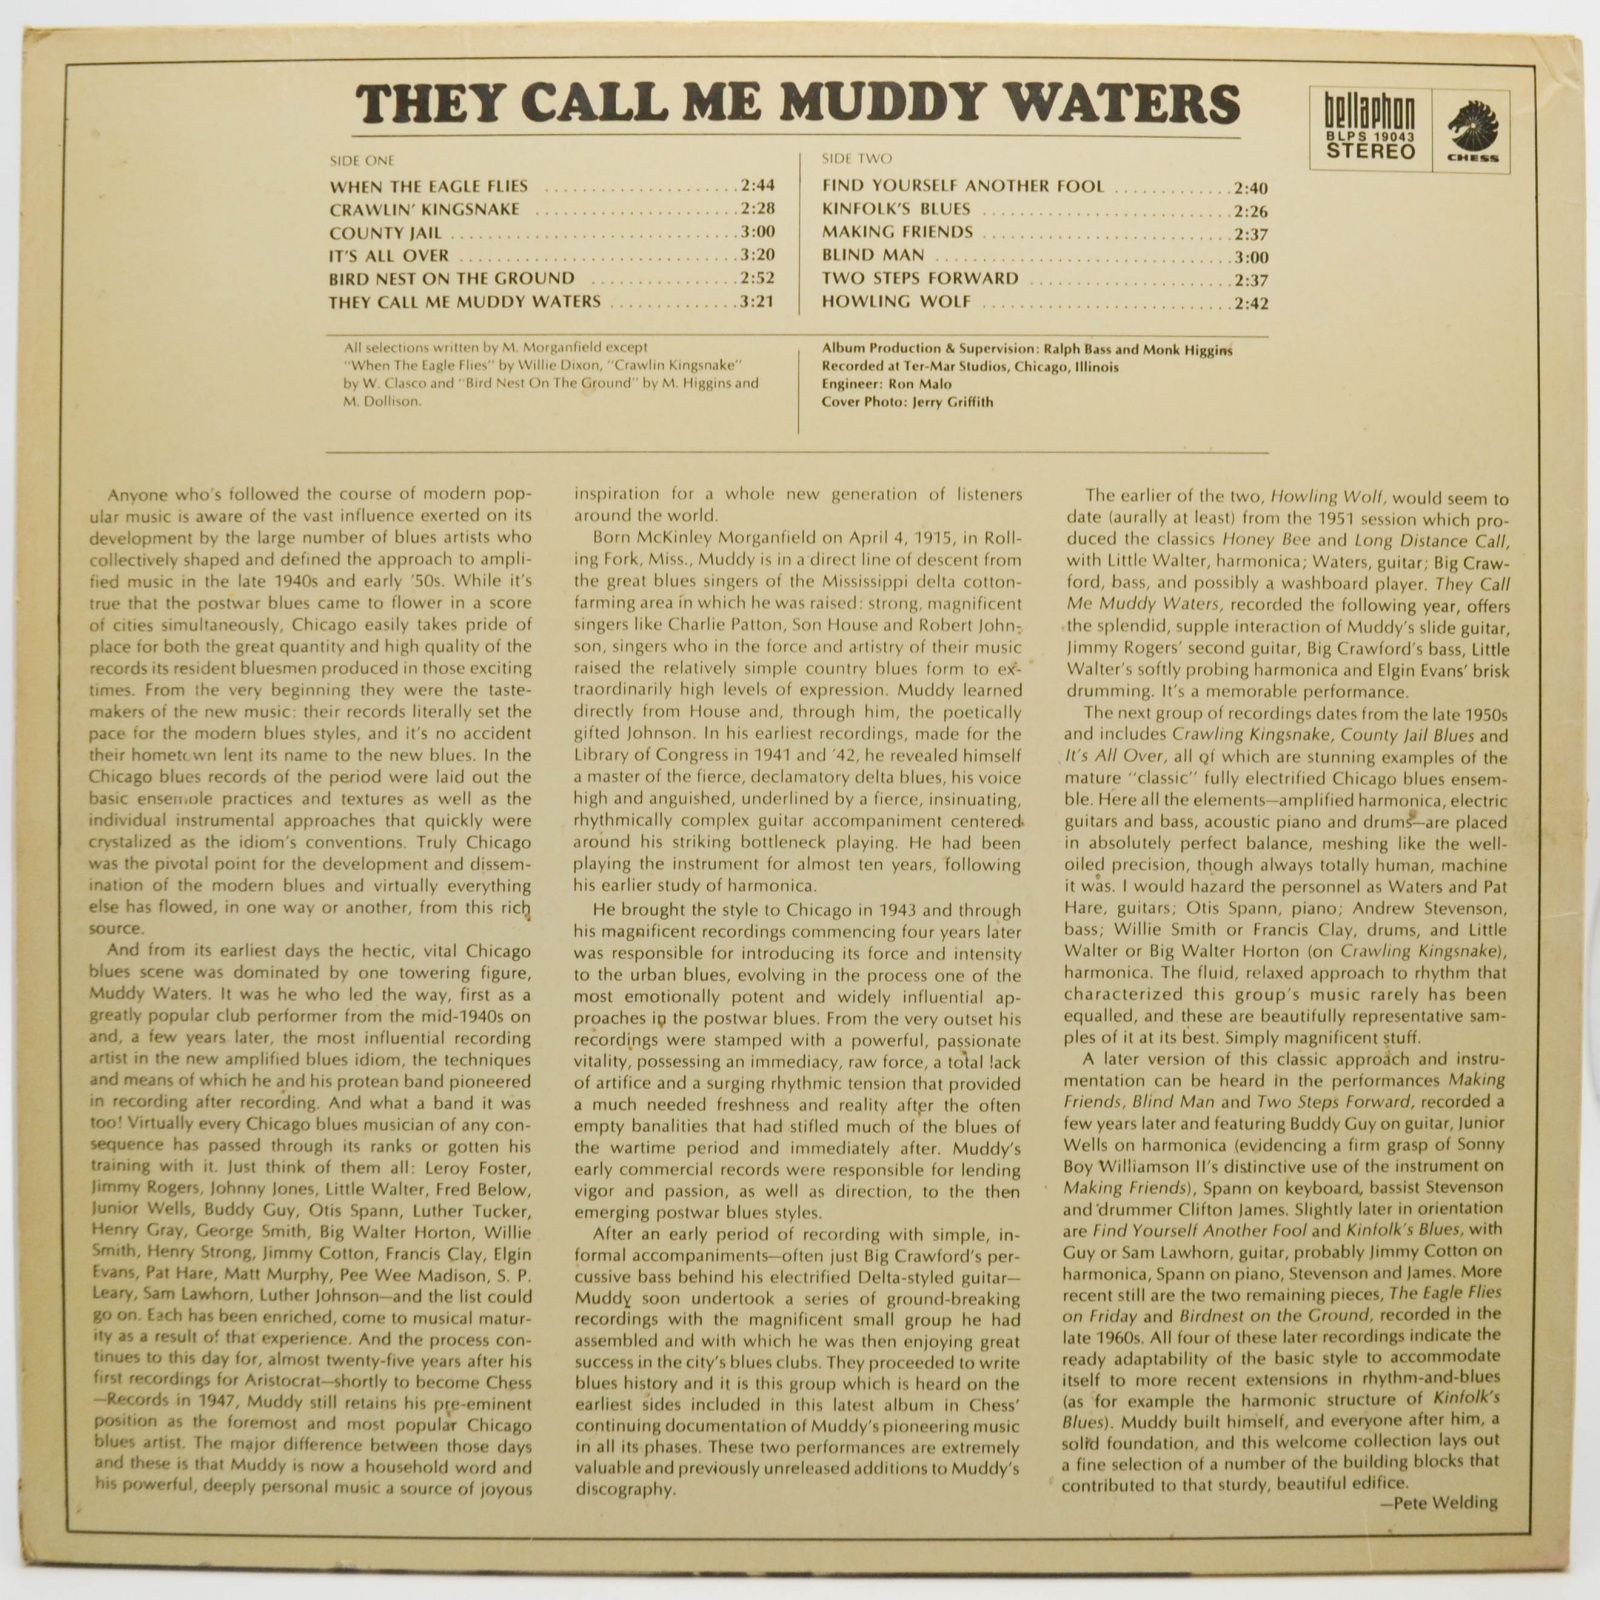 Muddy Waters — They Call Me Muddy Waters, 1971